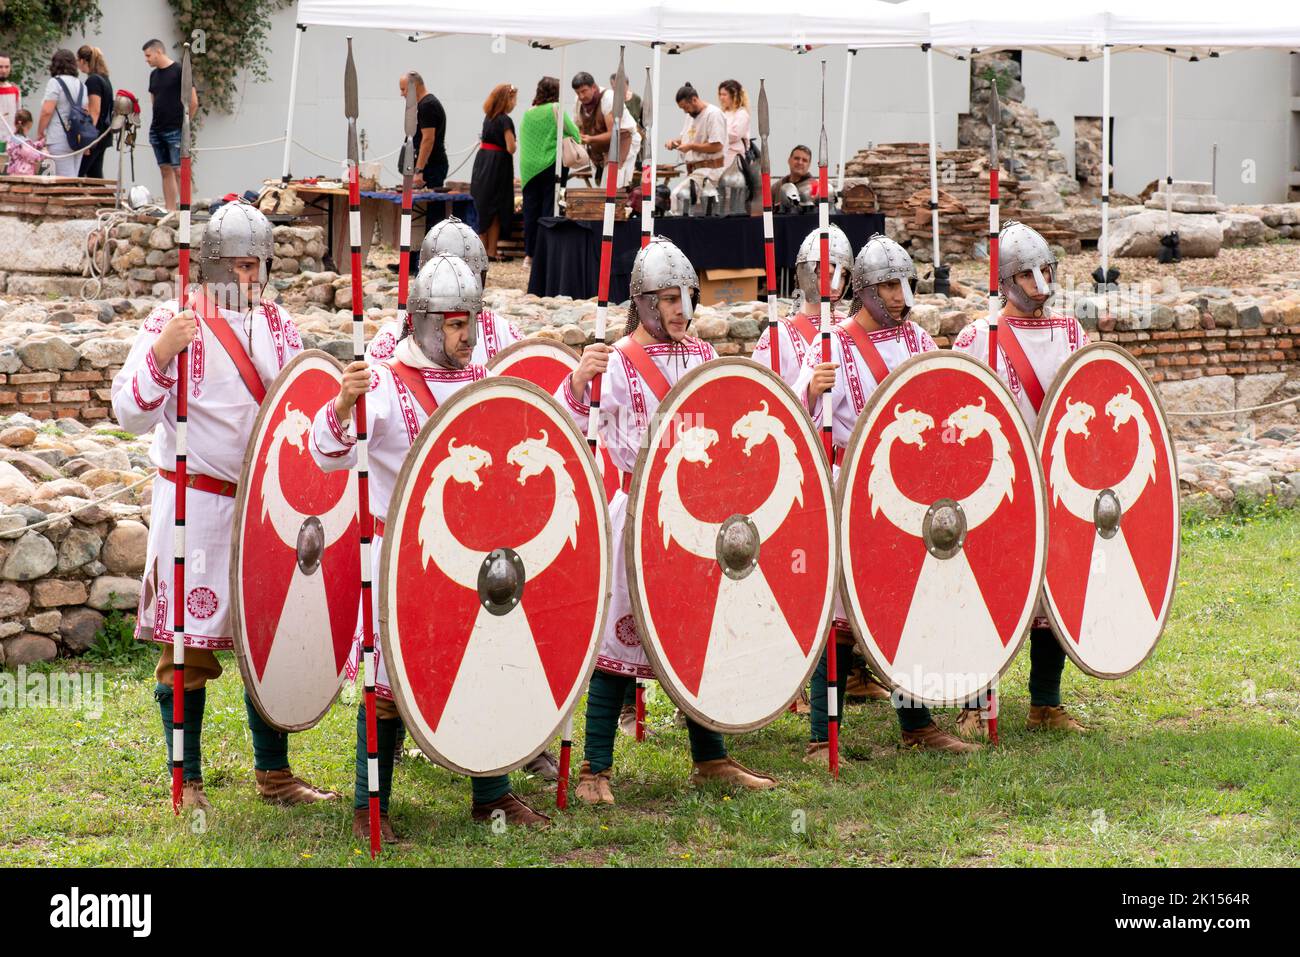 Reenactment of Roman military manoeuvres during the 'Serdica is my Rome' heritage festival at the archaeological park 'West Gate of Serdica' in Sofia, Bulgaria, Eastern Europe, Balkans, EU Stock Photo